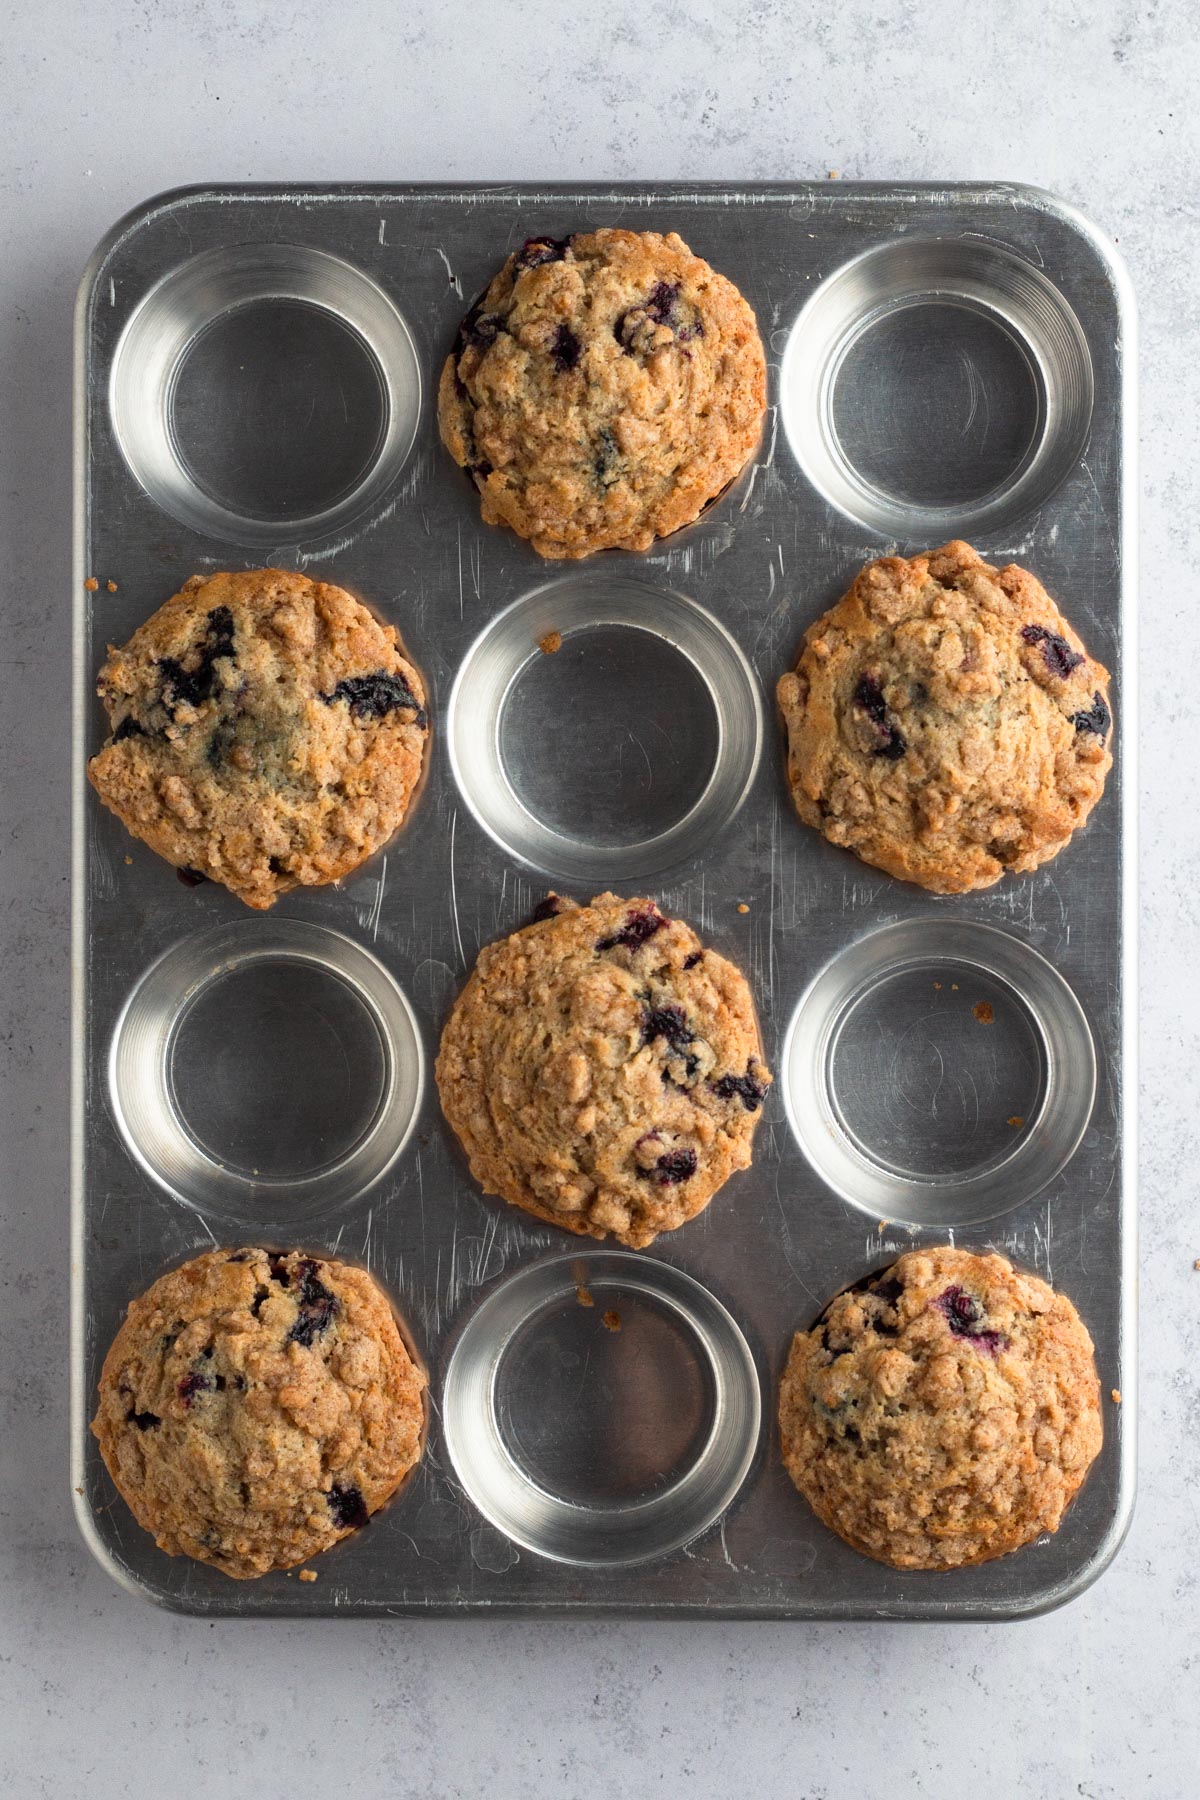 Six baked muffins in a metal muffin pan.